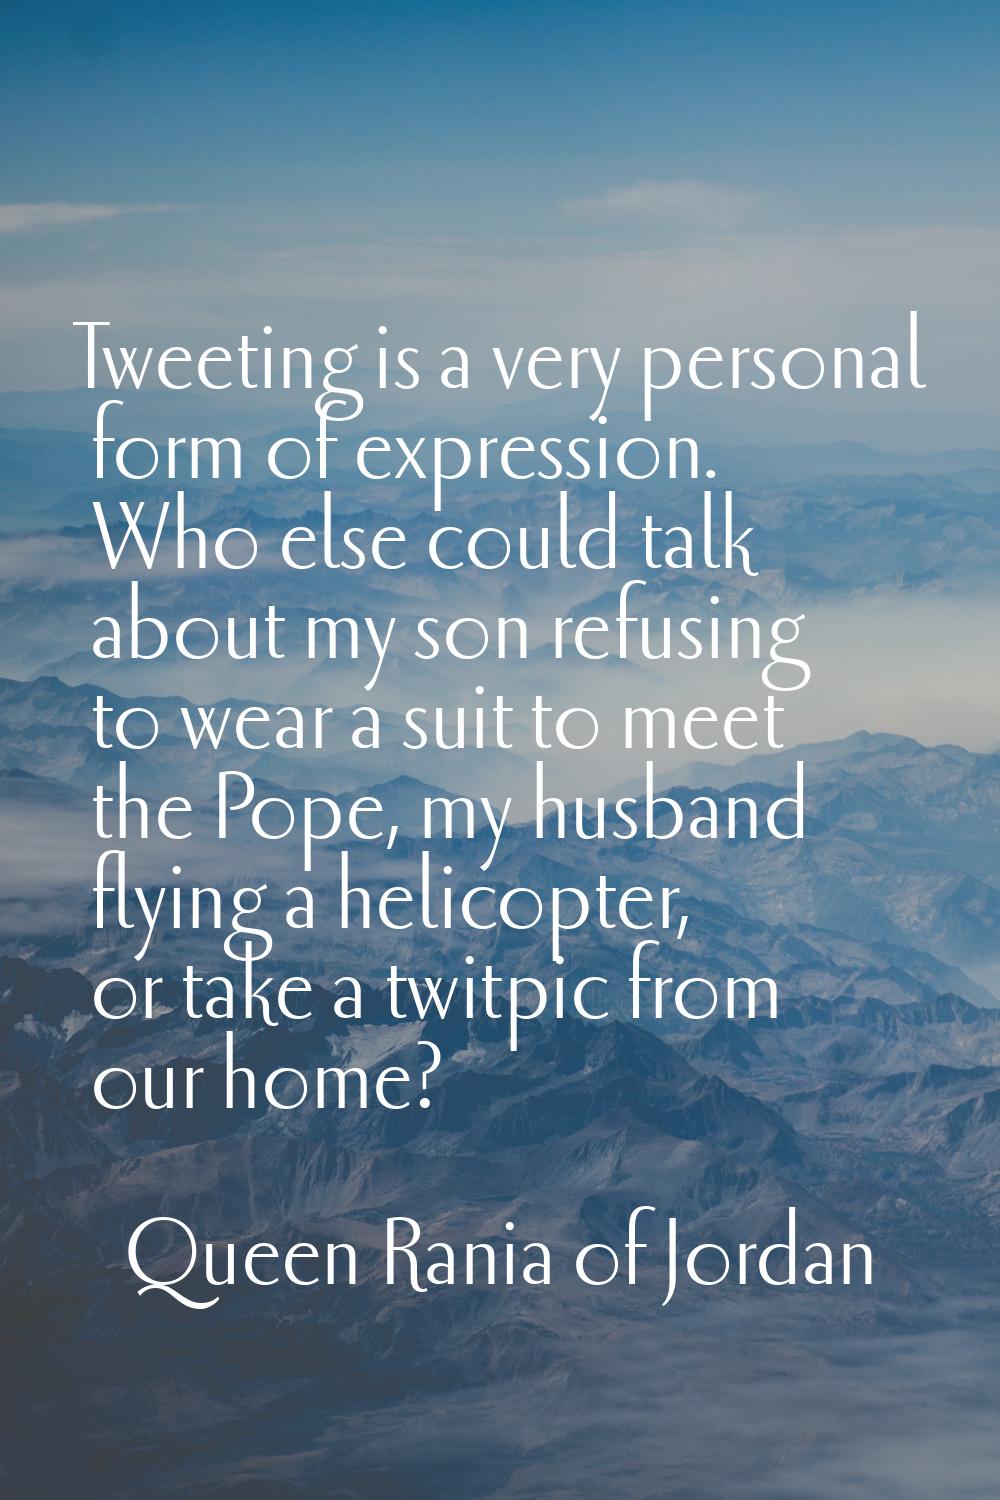 Tweeting is a very personal form of expression. Who else could talk about my son refusing to wear a